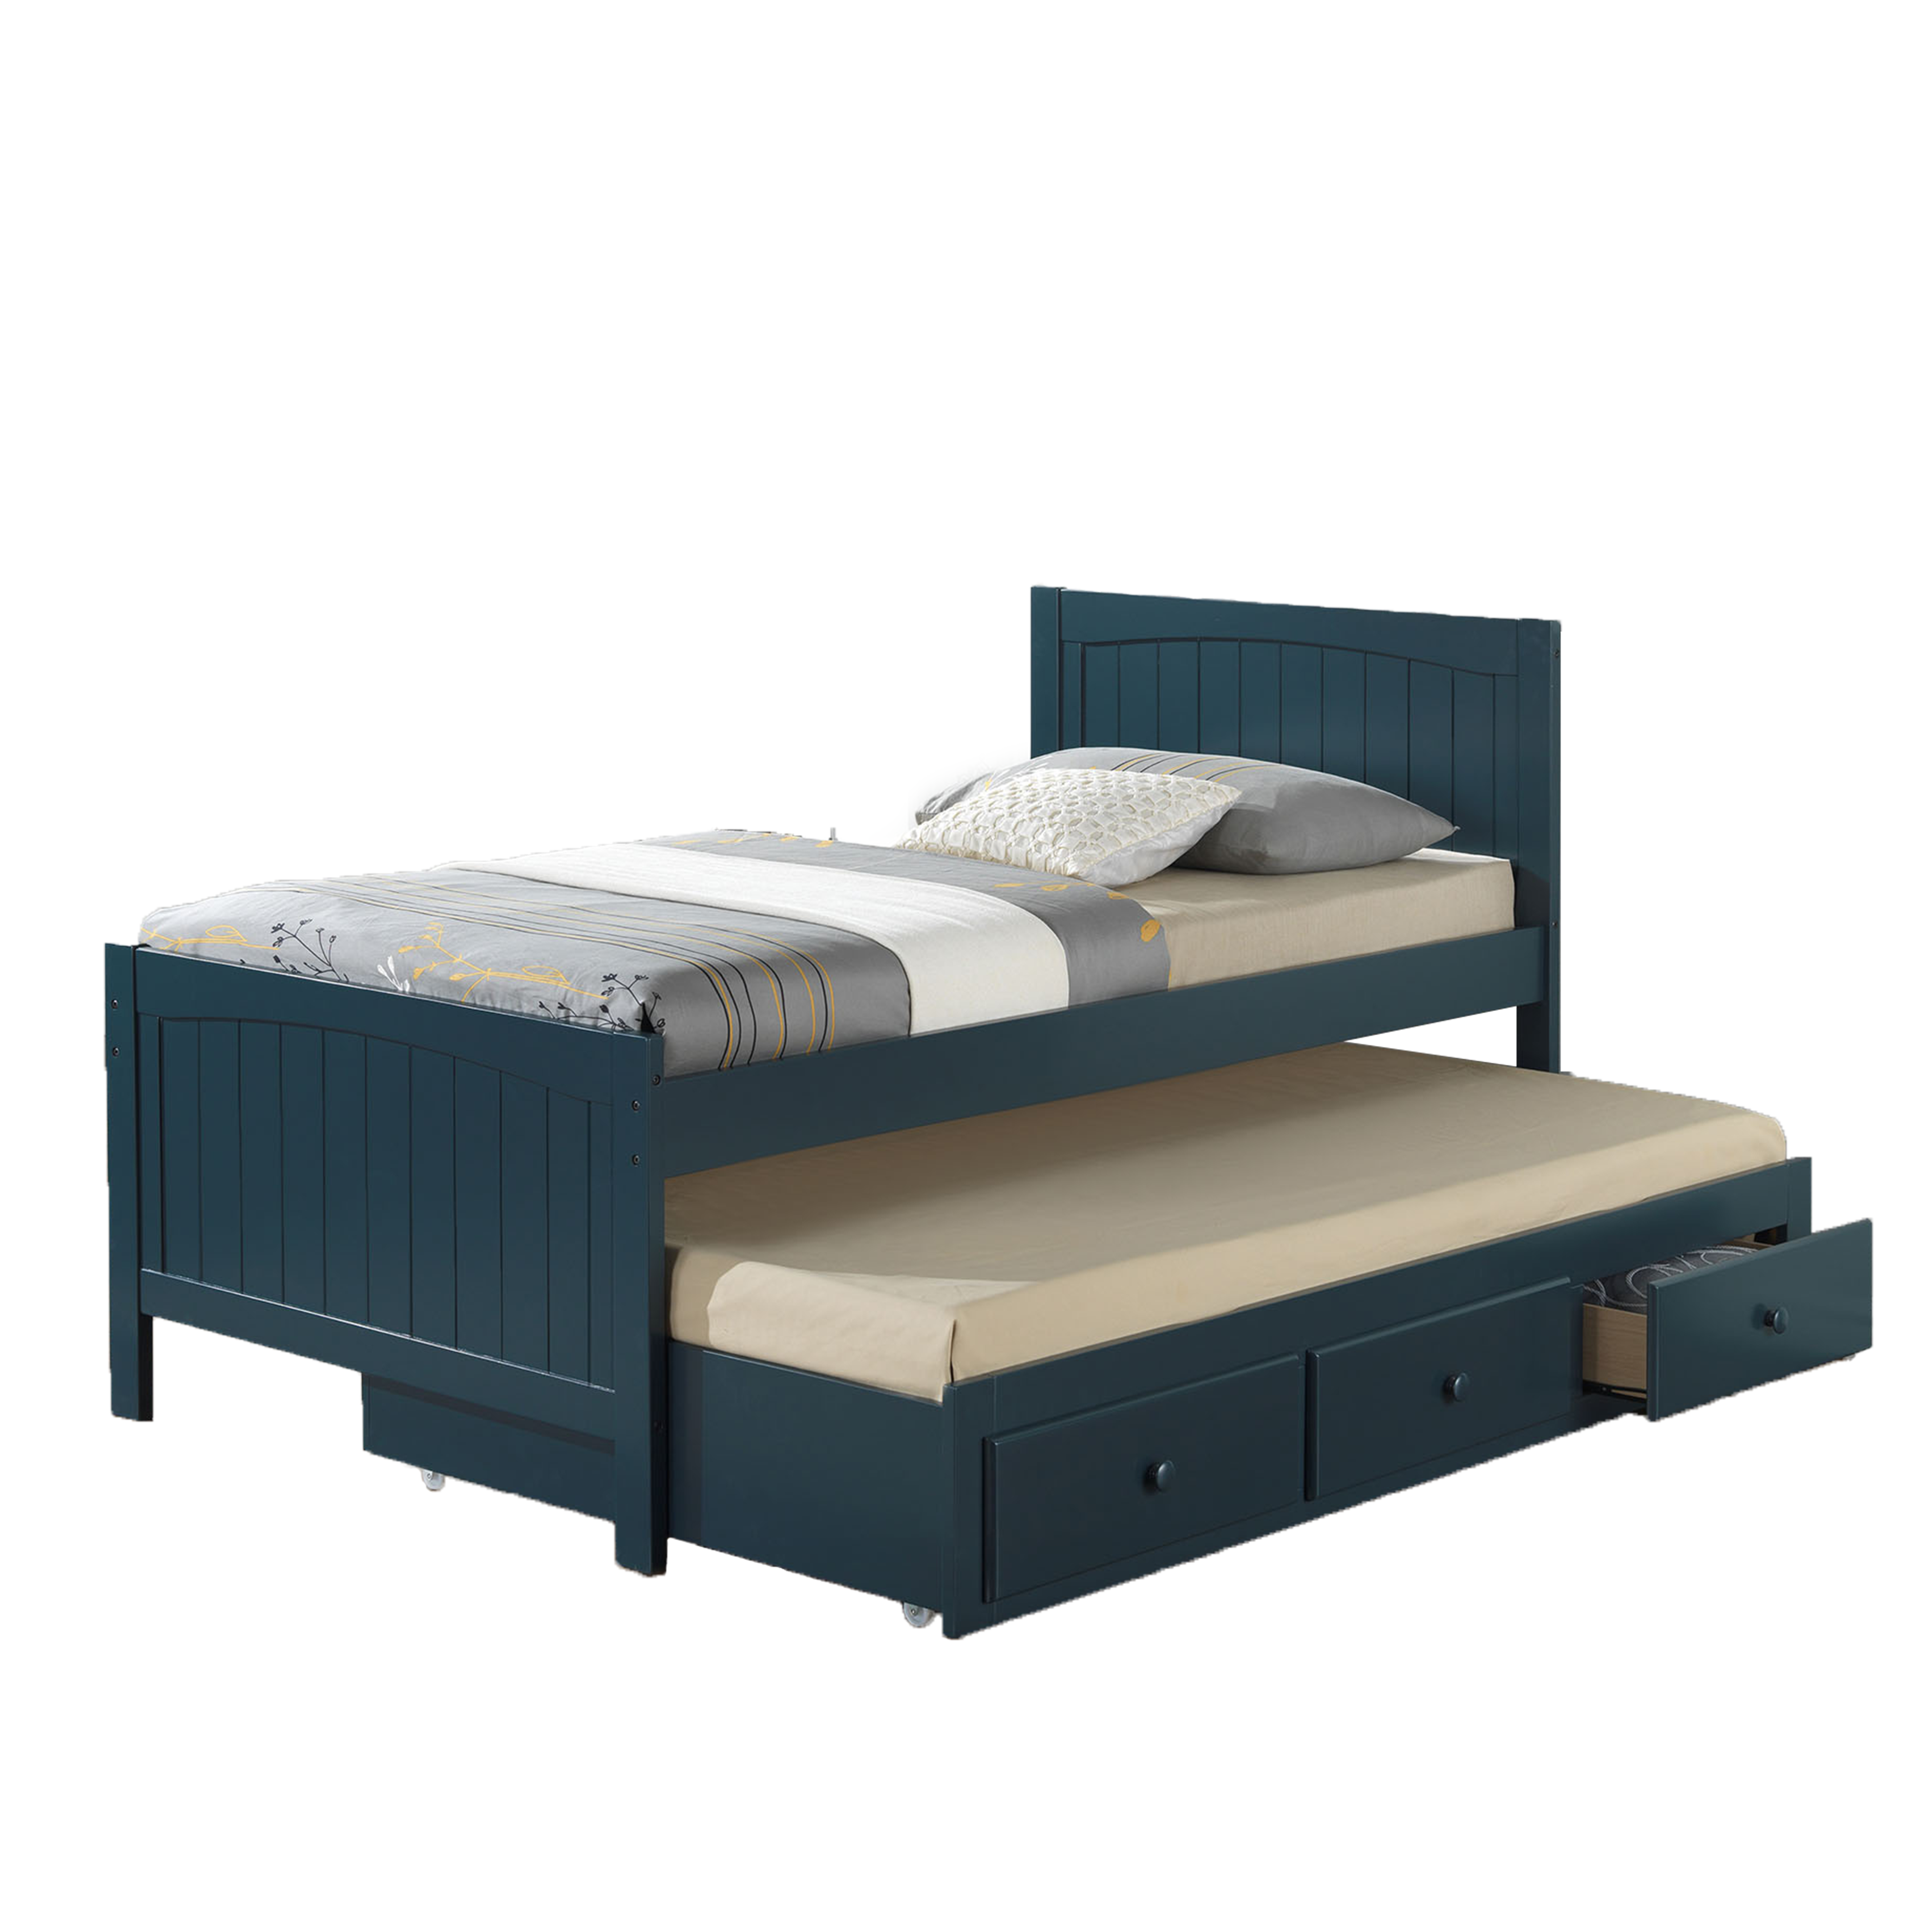 Blue Hella Captain Bed with Underbed and Storage Drawers from Recafi Furniture